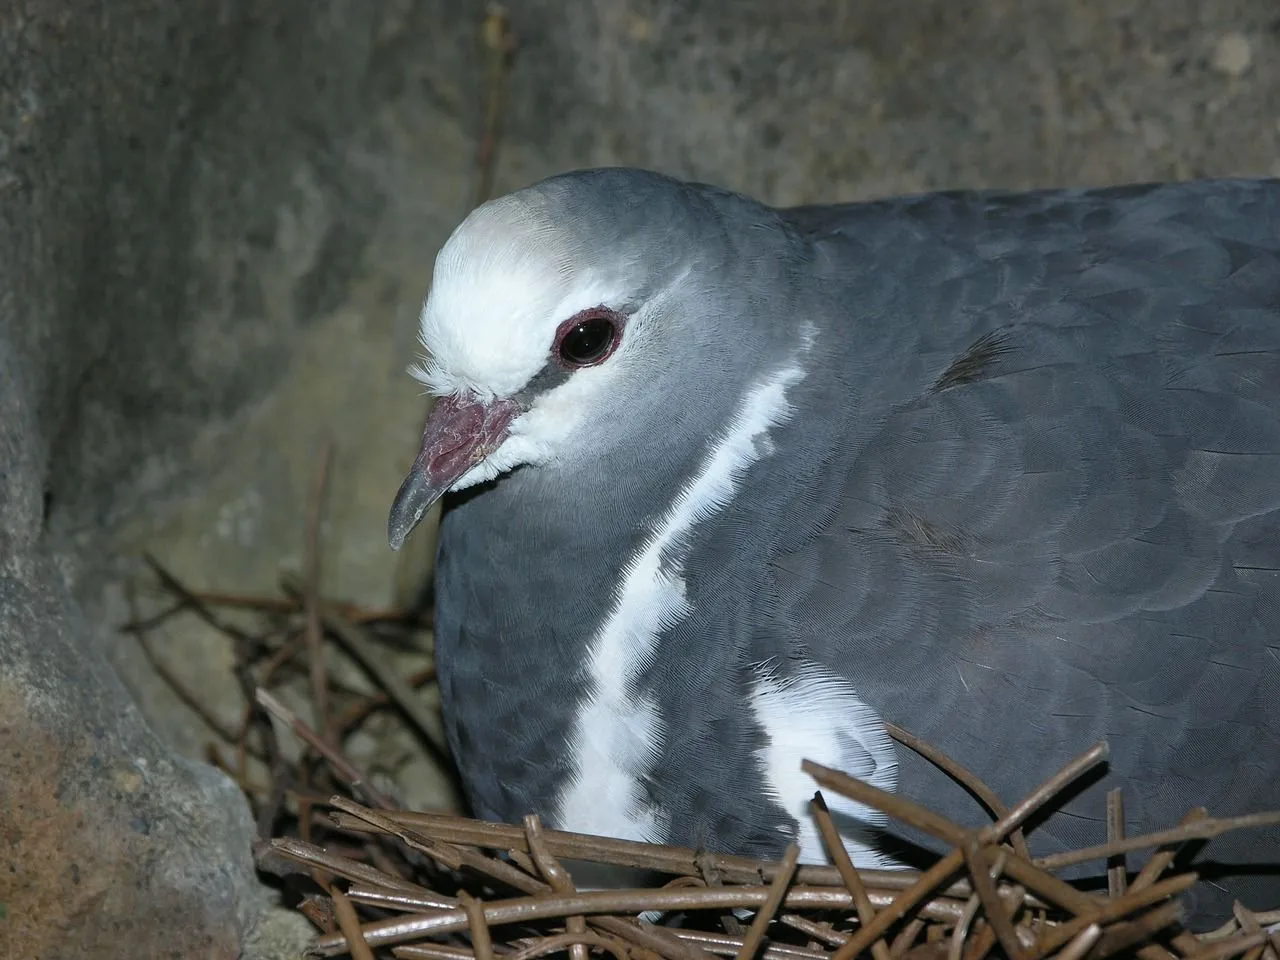 Doves usually lay two eggs per clutch.